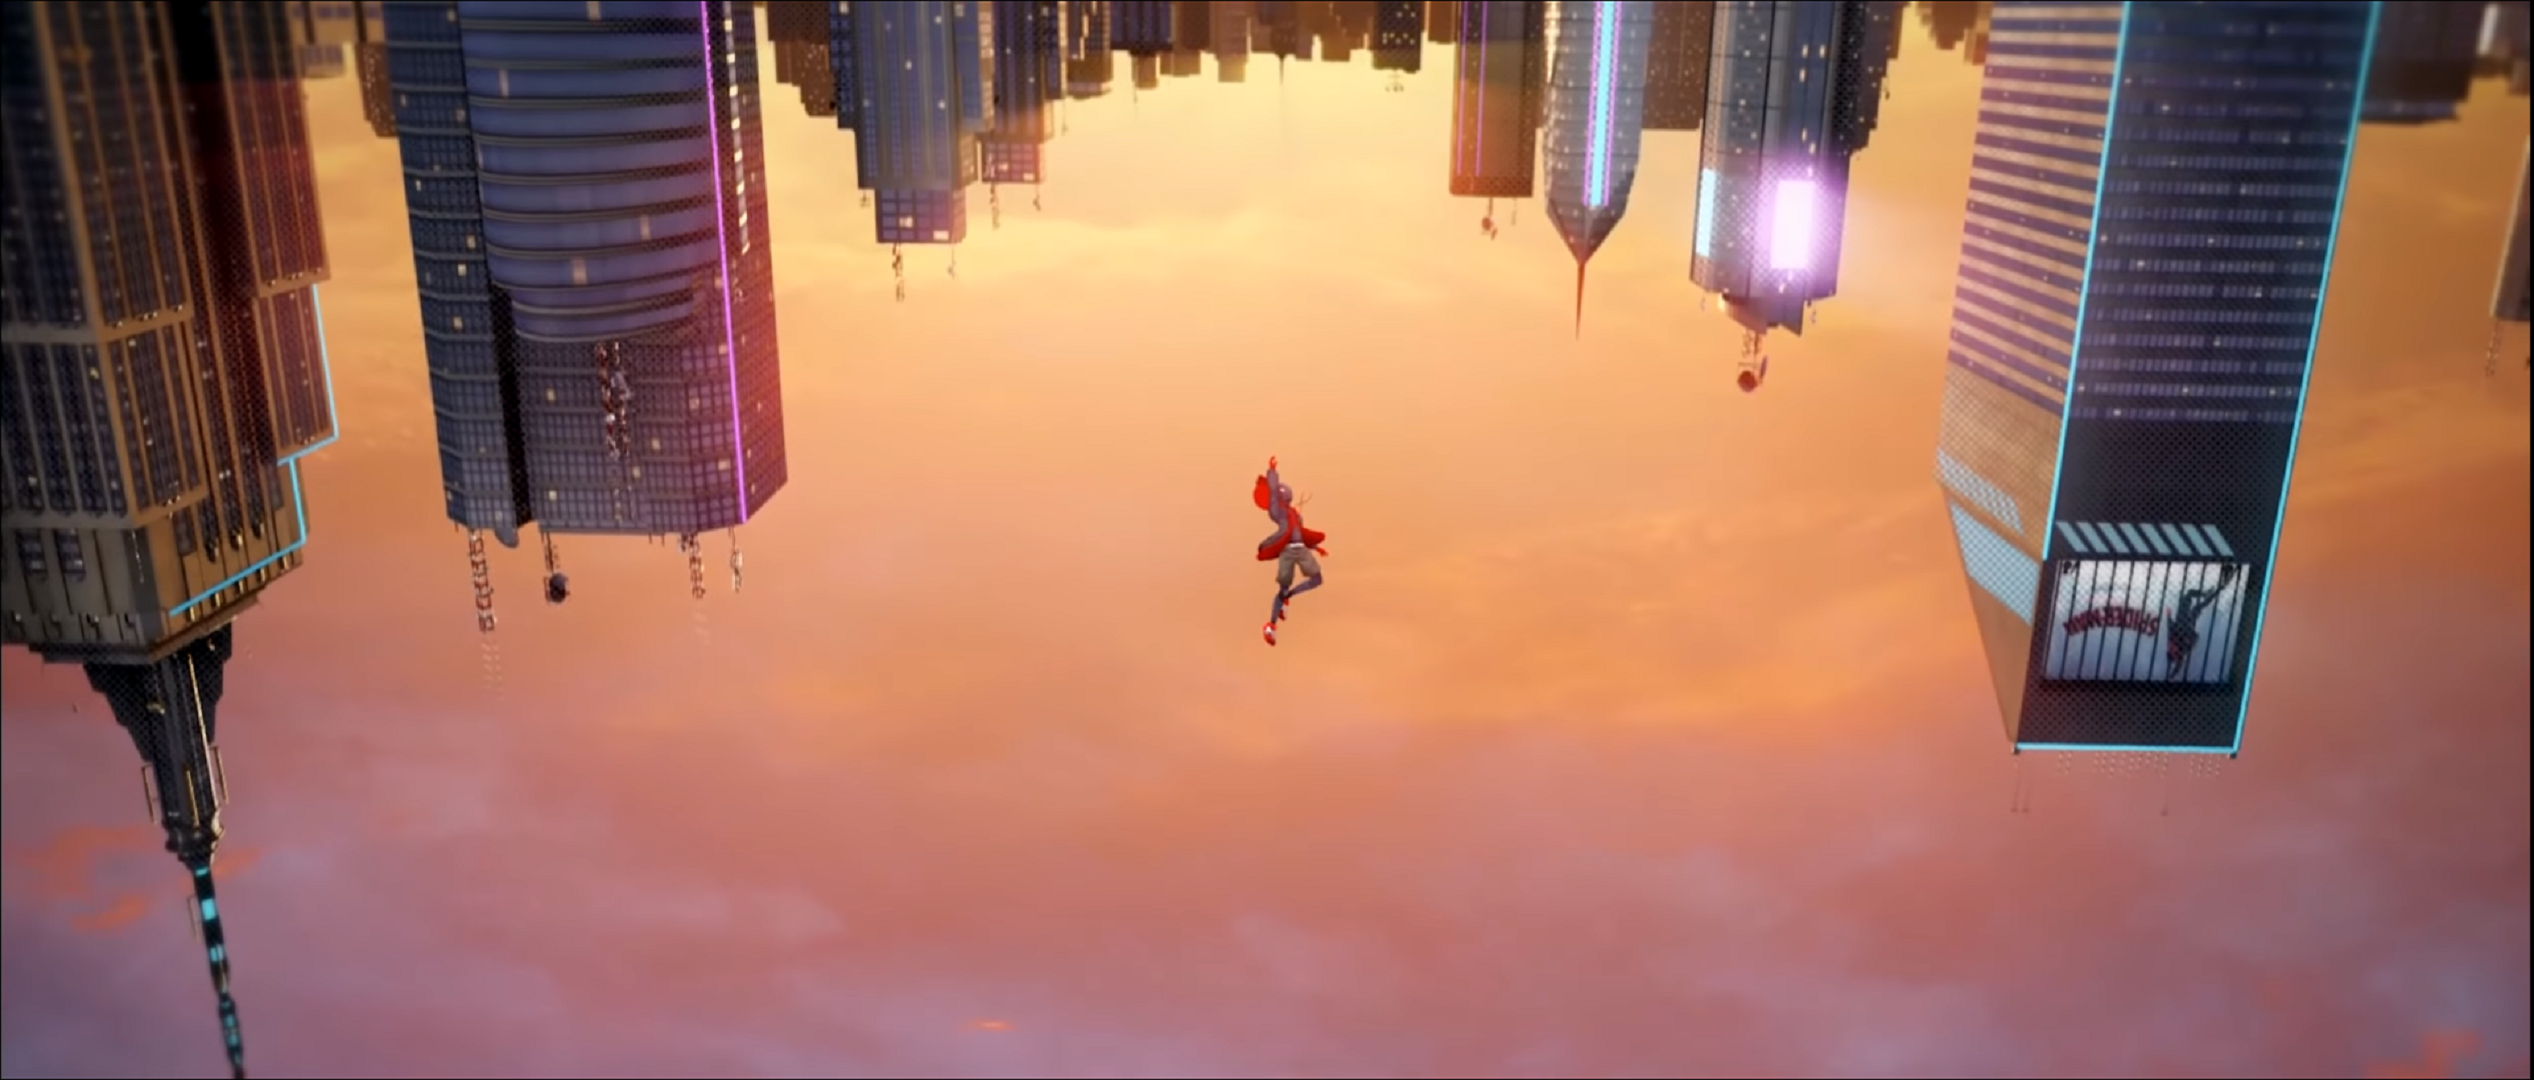 Miles Morales falling from SpiderMan Across the SpiderVerse 4K wallpaper  download